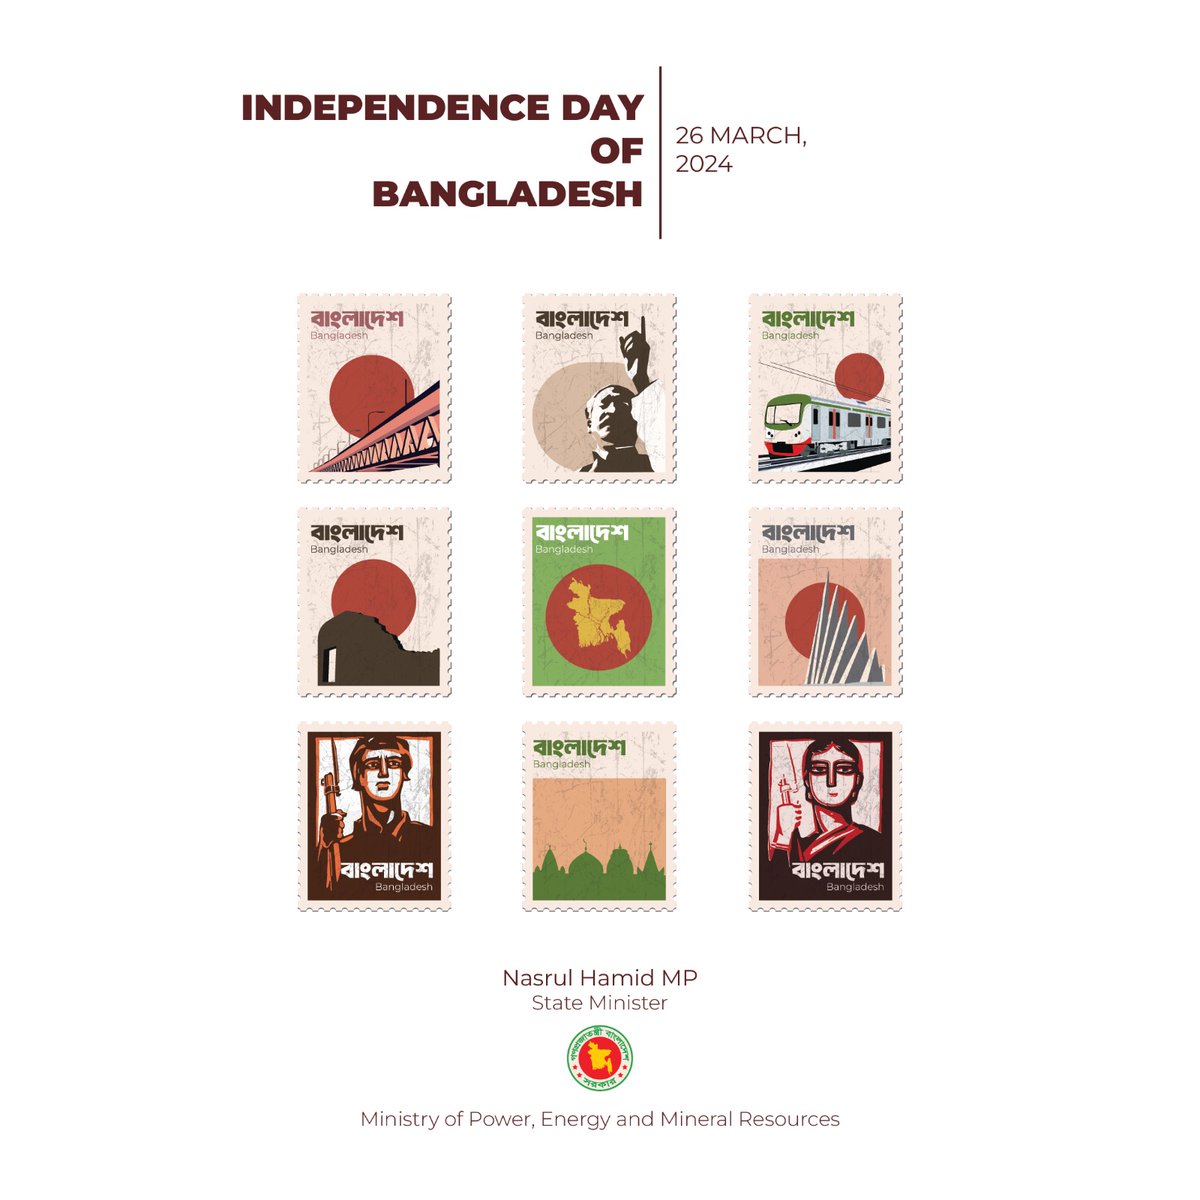 #OnThisDay, we commemorate the historic declaration of Bangladesh's independence by the revered Father of the nation, Bangabandhu Sheikh Mujibur Rahman. Through the valorous sacrifices of our freedom fighters, the resilience of 200k Birangonas, and the profound loss of 3 million